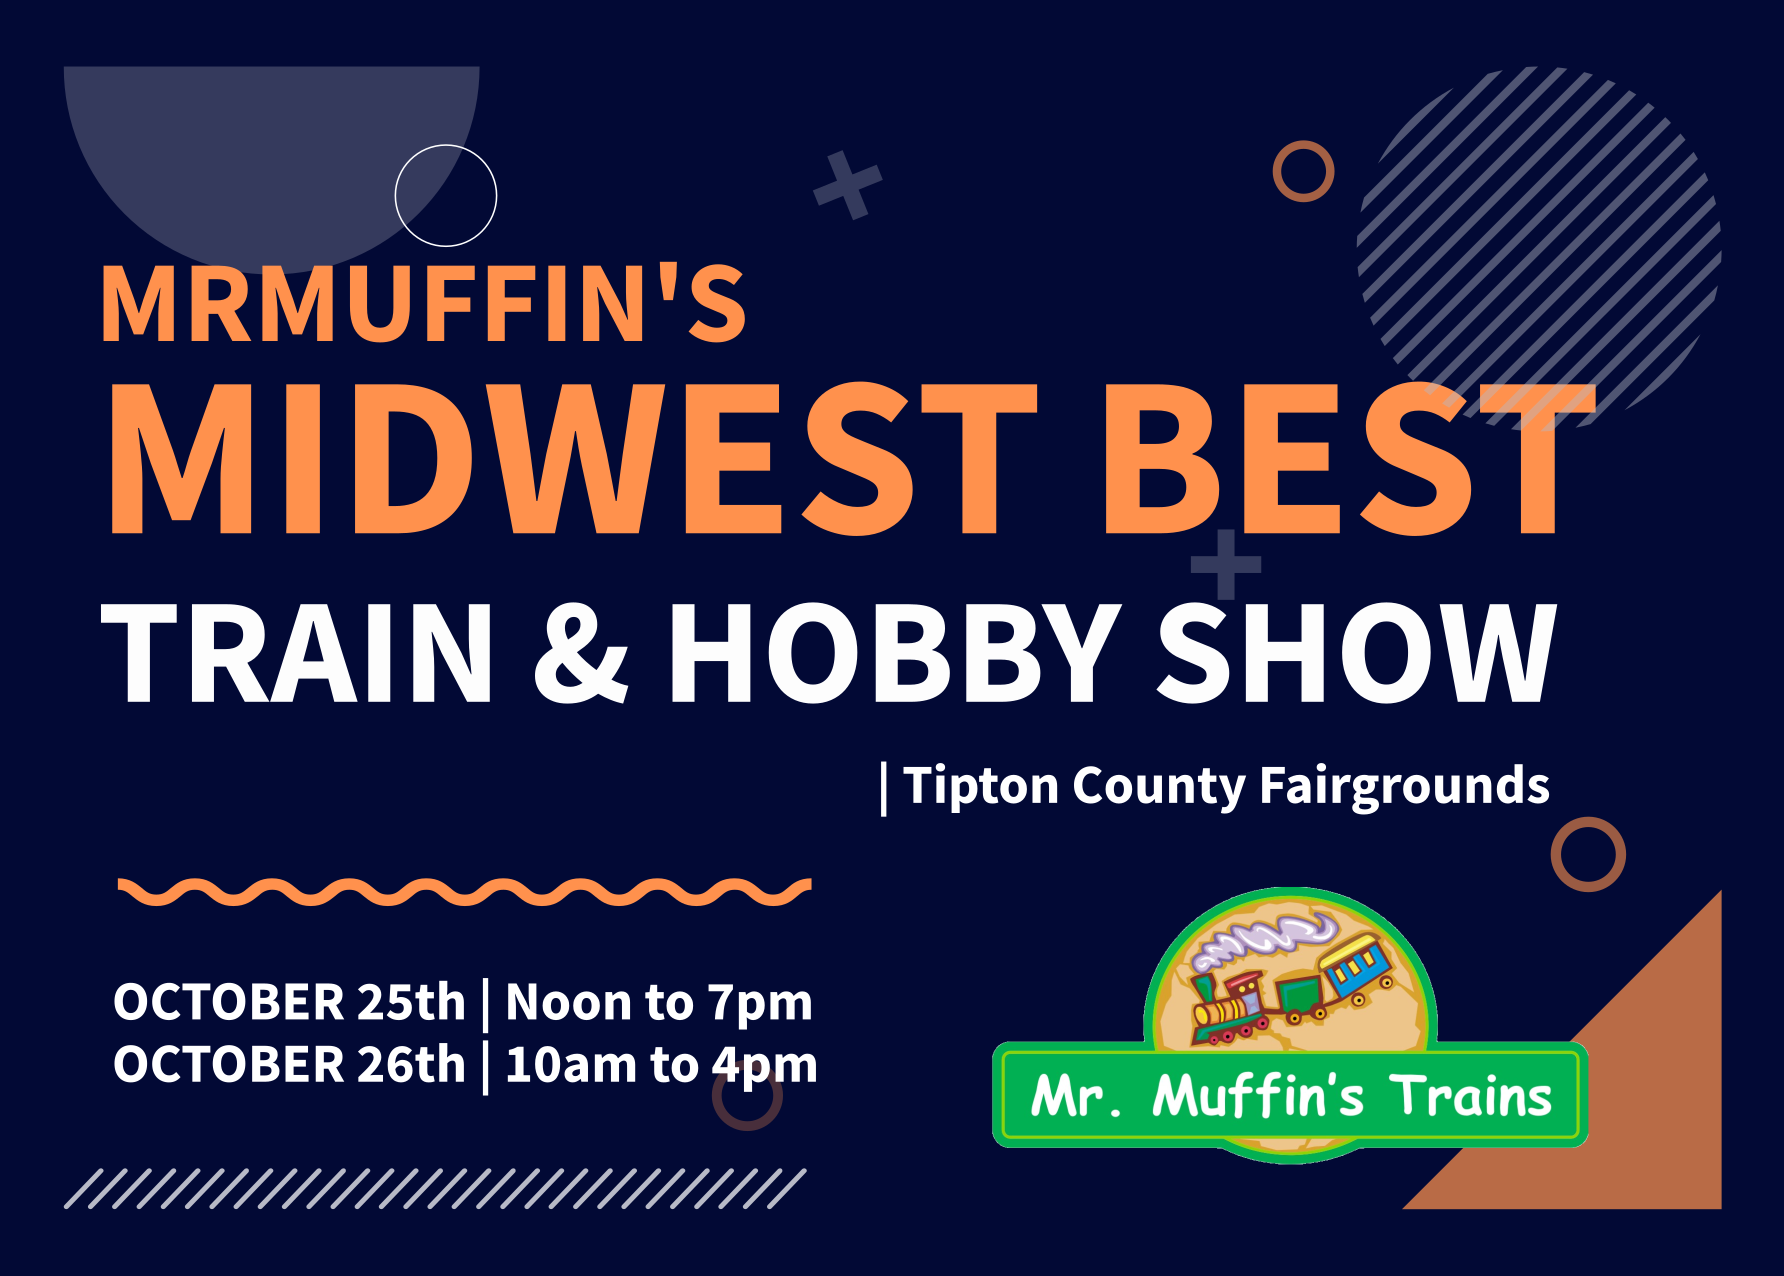 MrMuffin's Midwest Best Train and Hobby Show - Advanced Sale Tickets